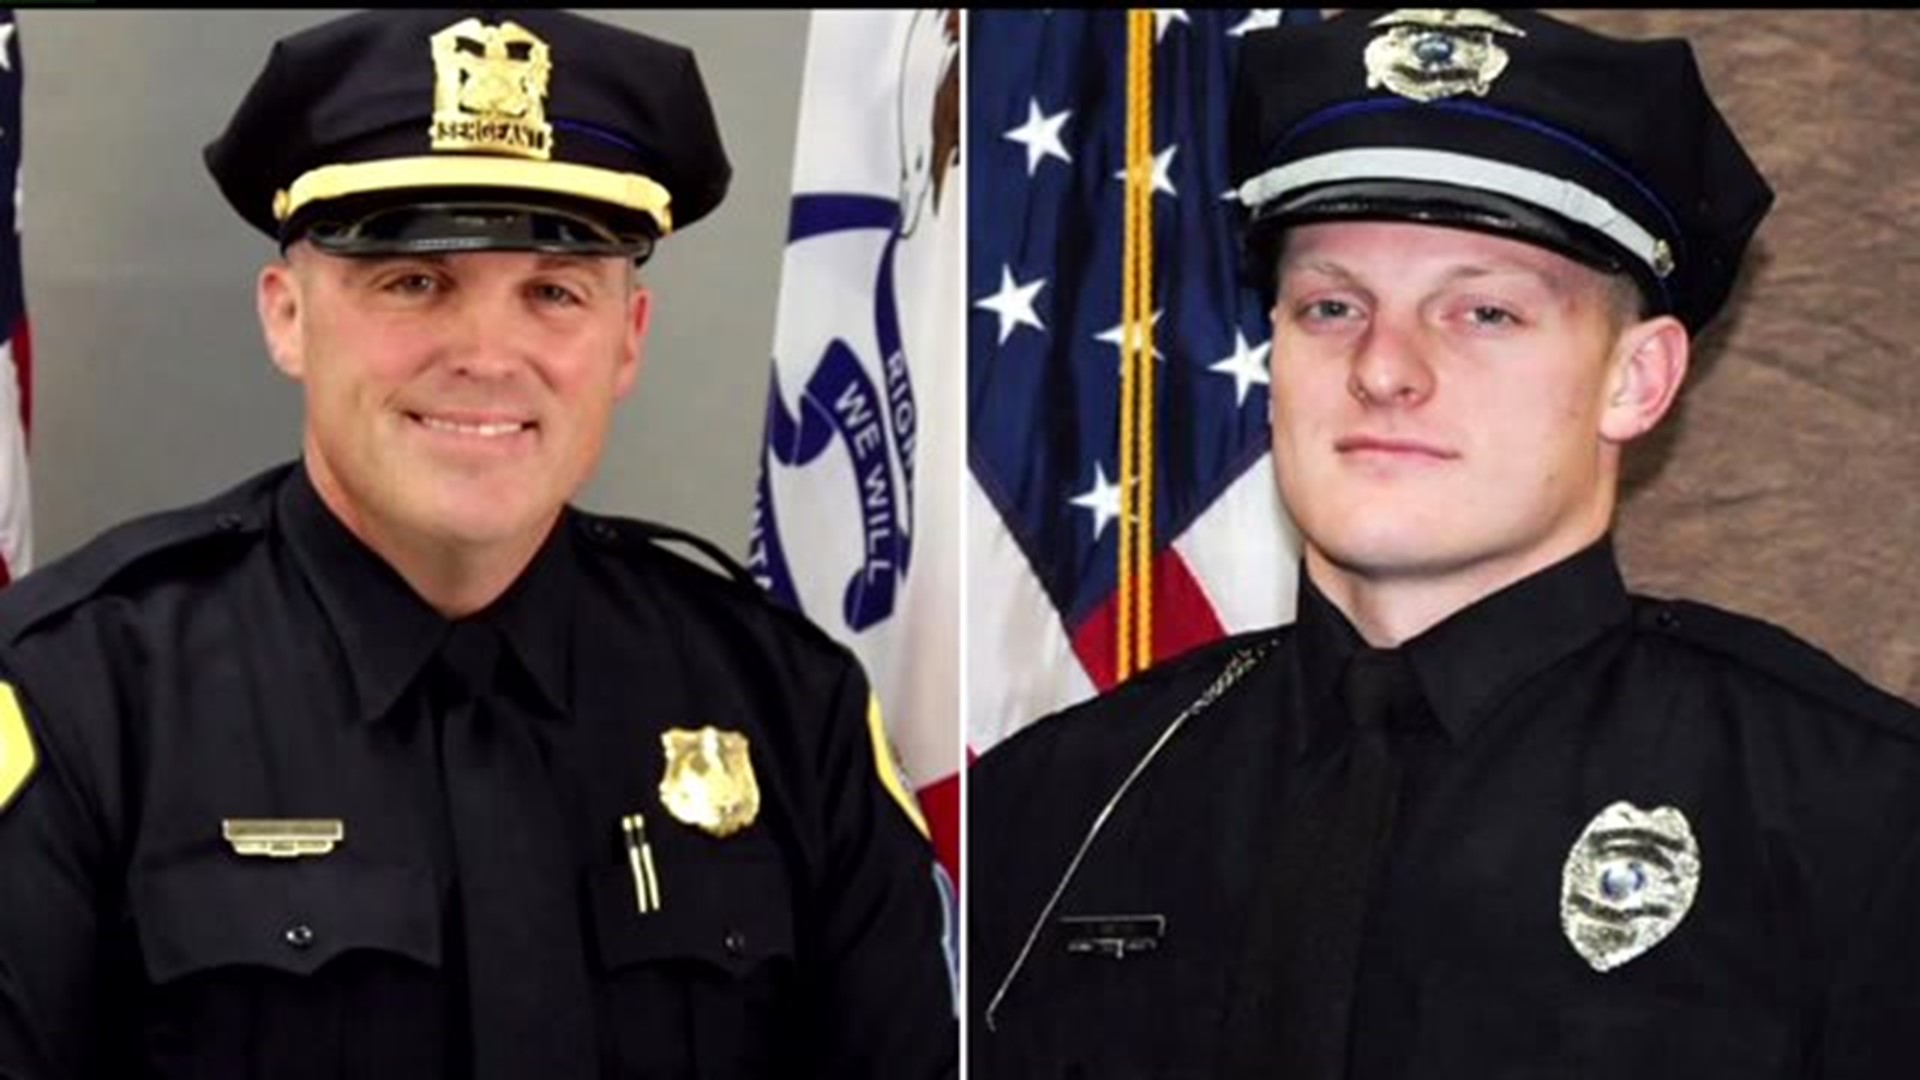 Man accused of killing two Iowa officers arrested in slain officers` handcuffs